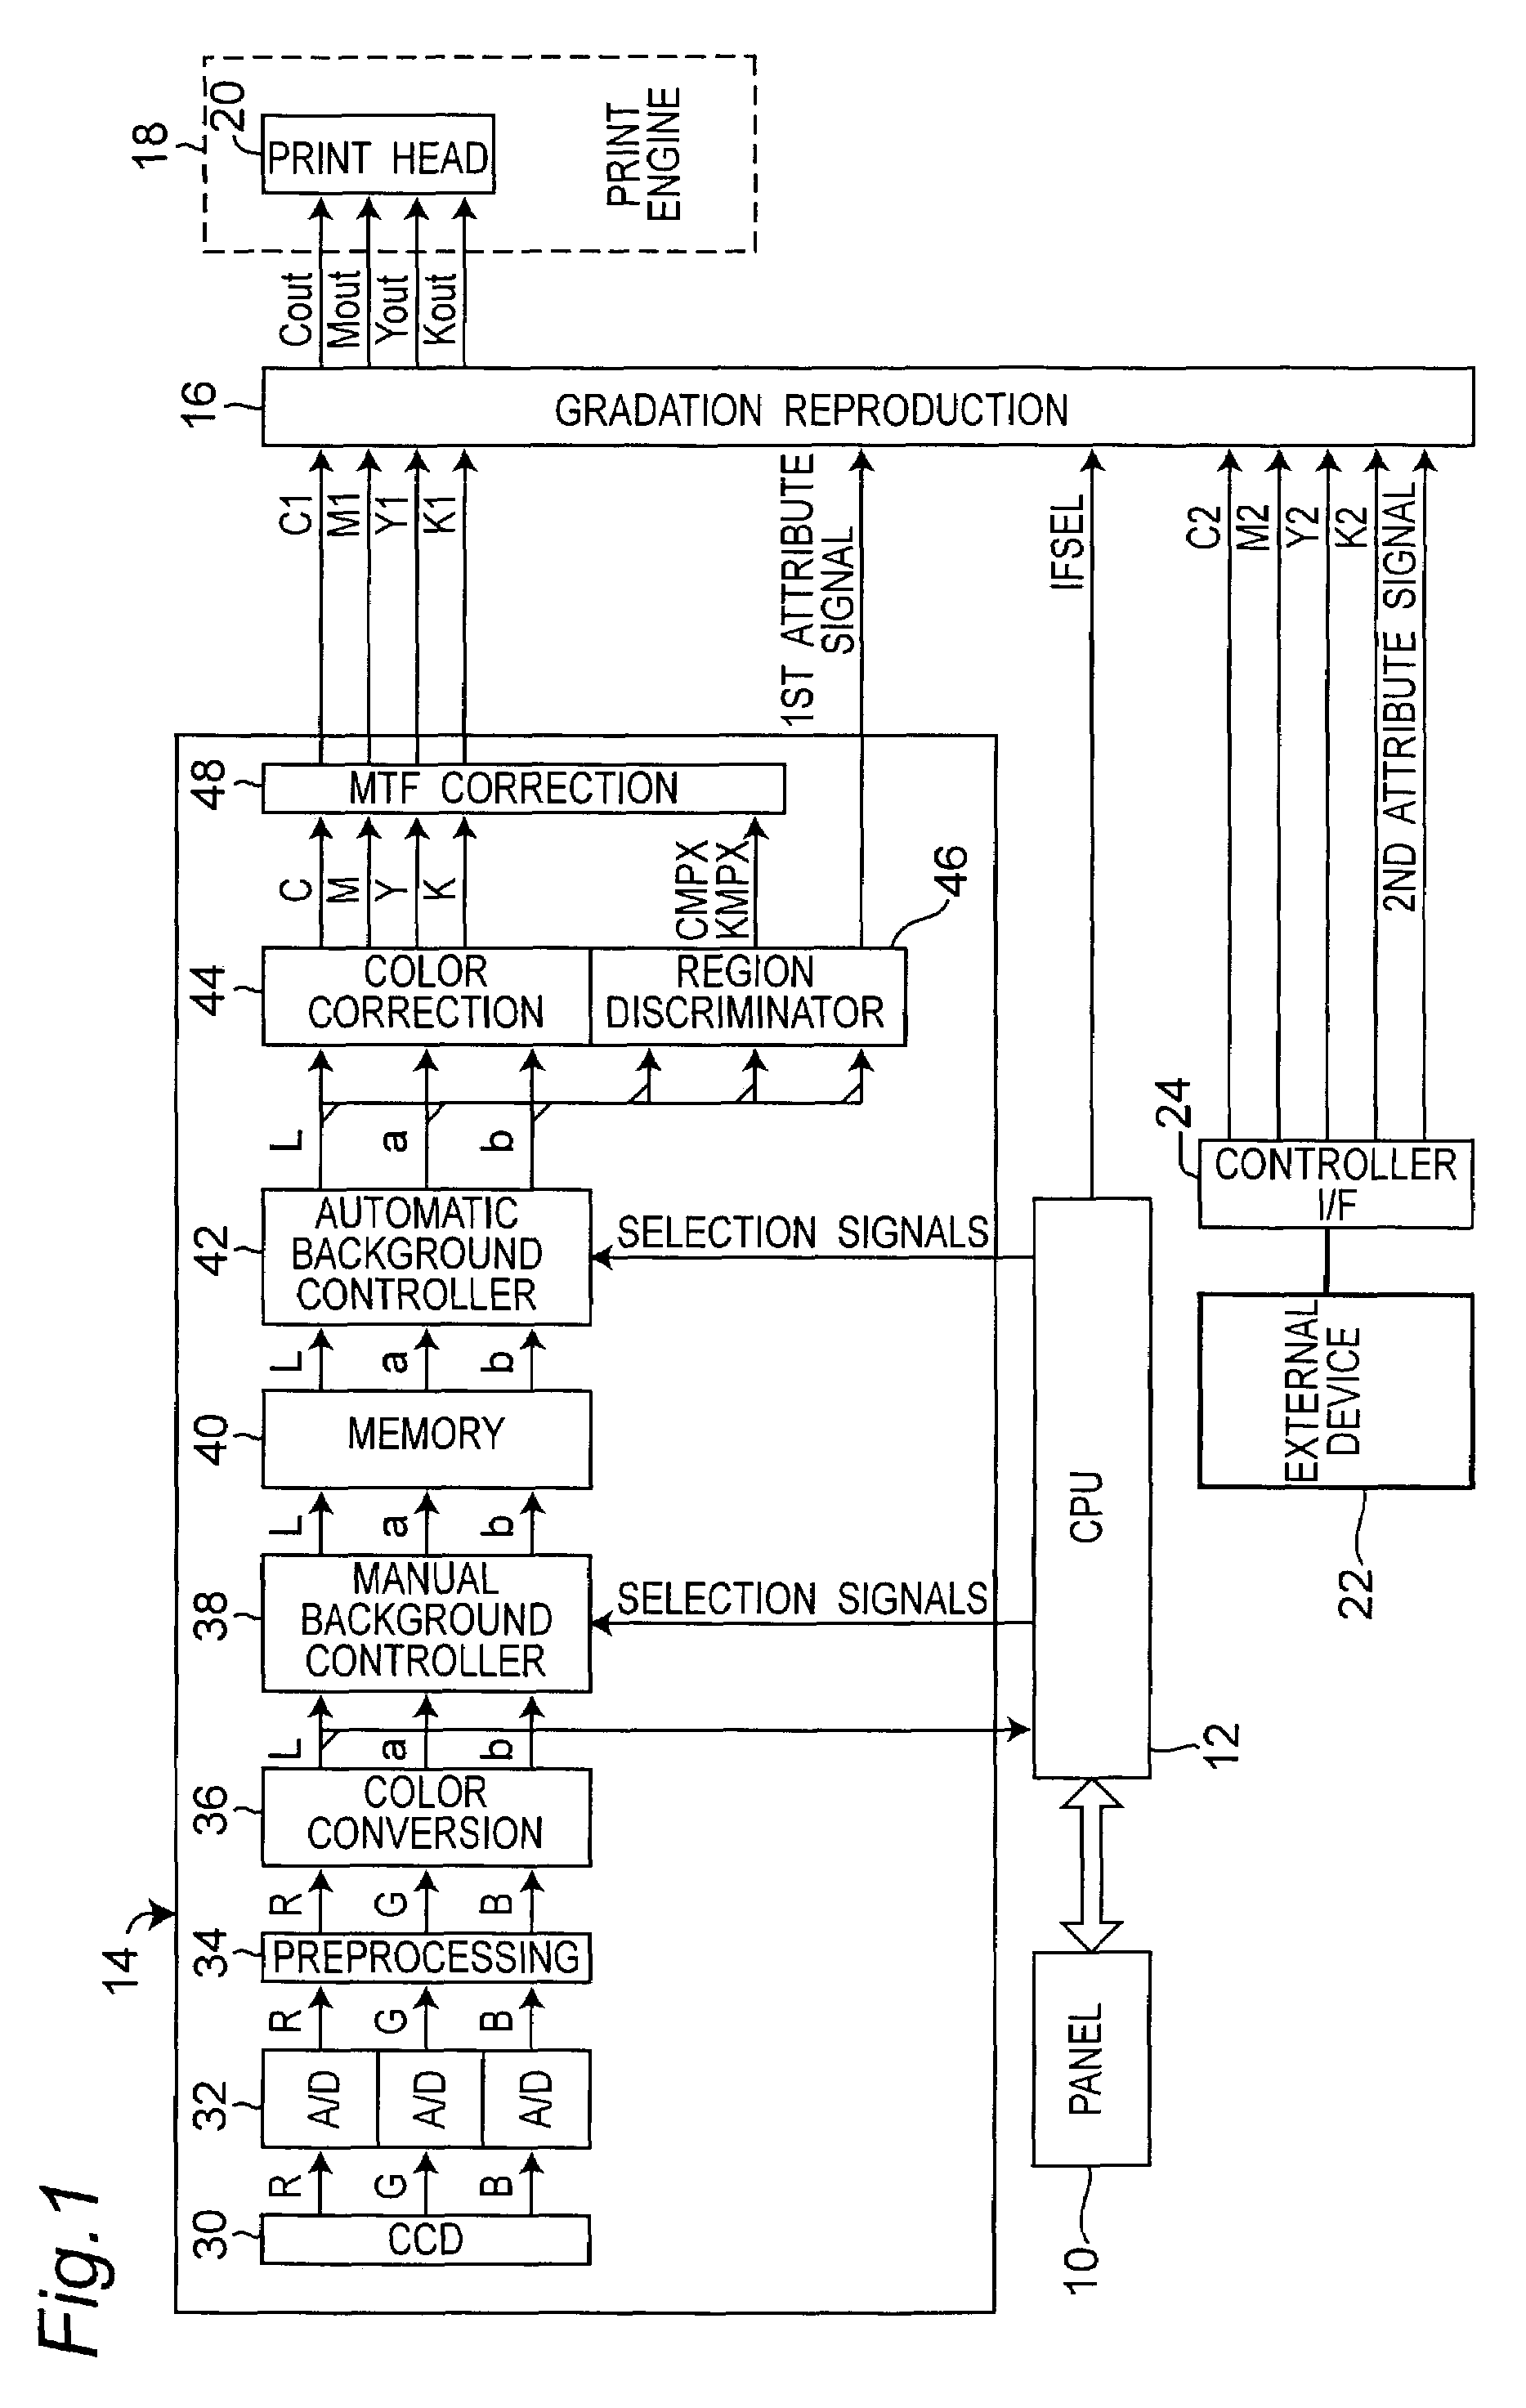 Color image processing apparatus with background control